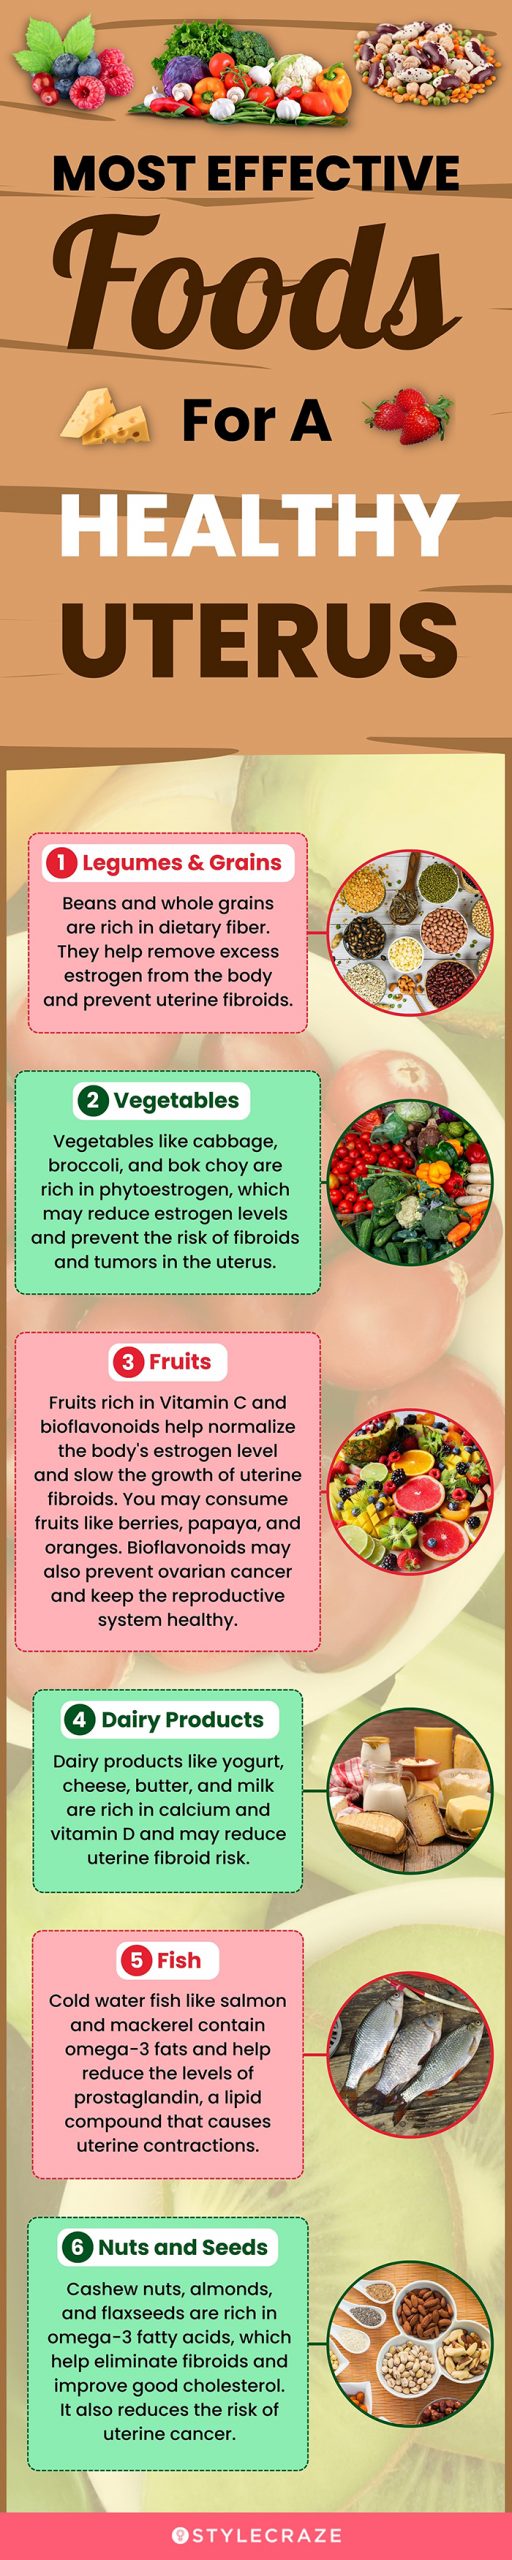 most effective food for a healthy uterus (infographic)